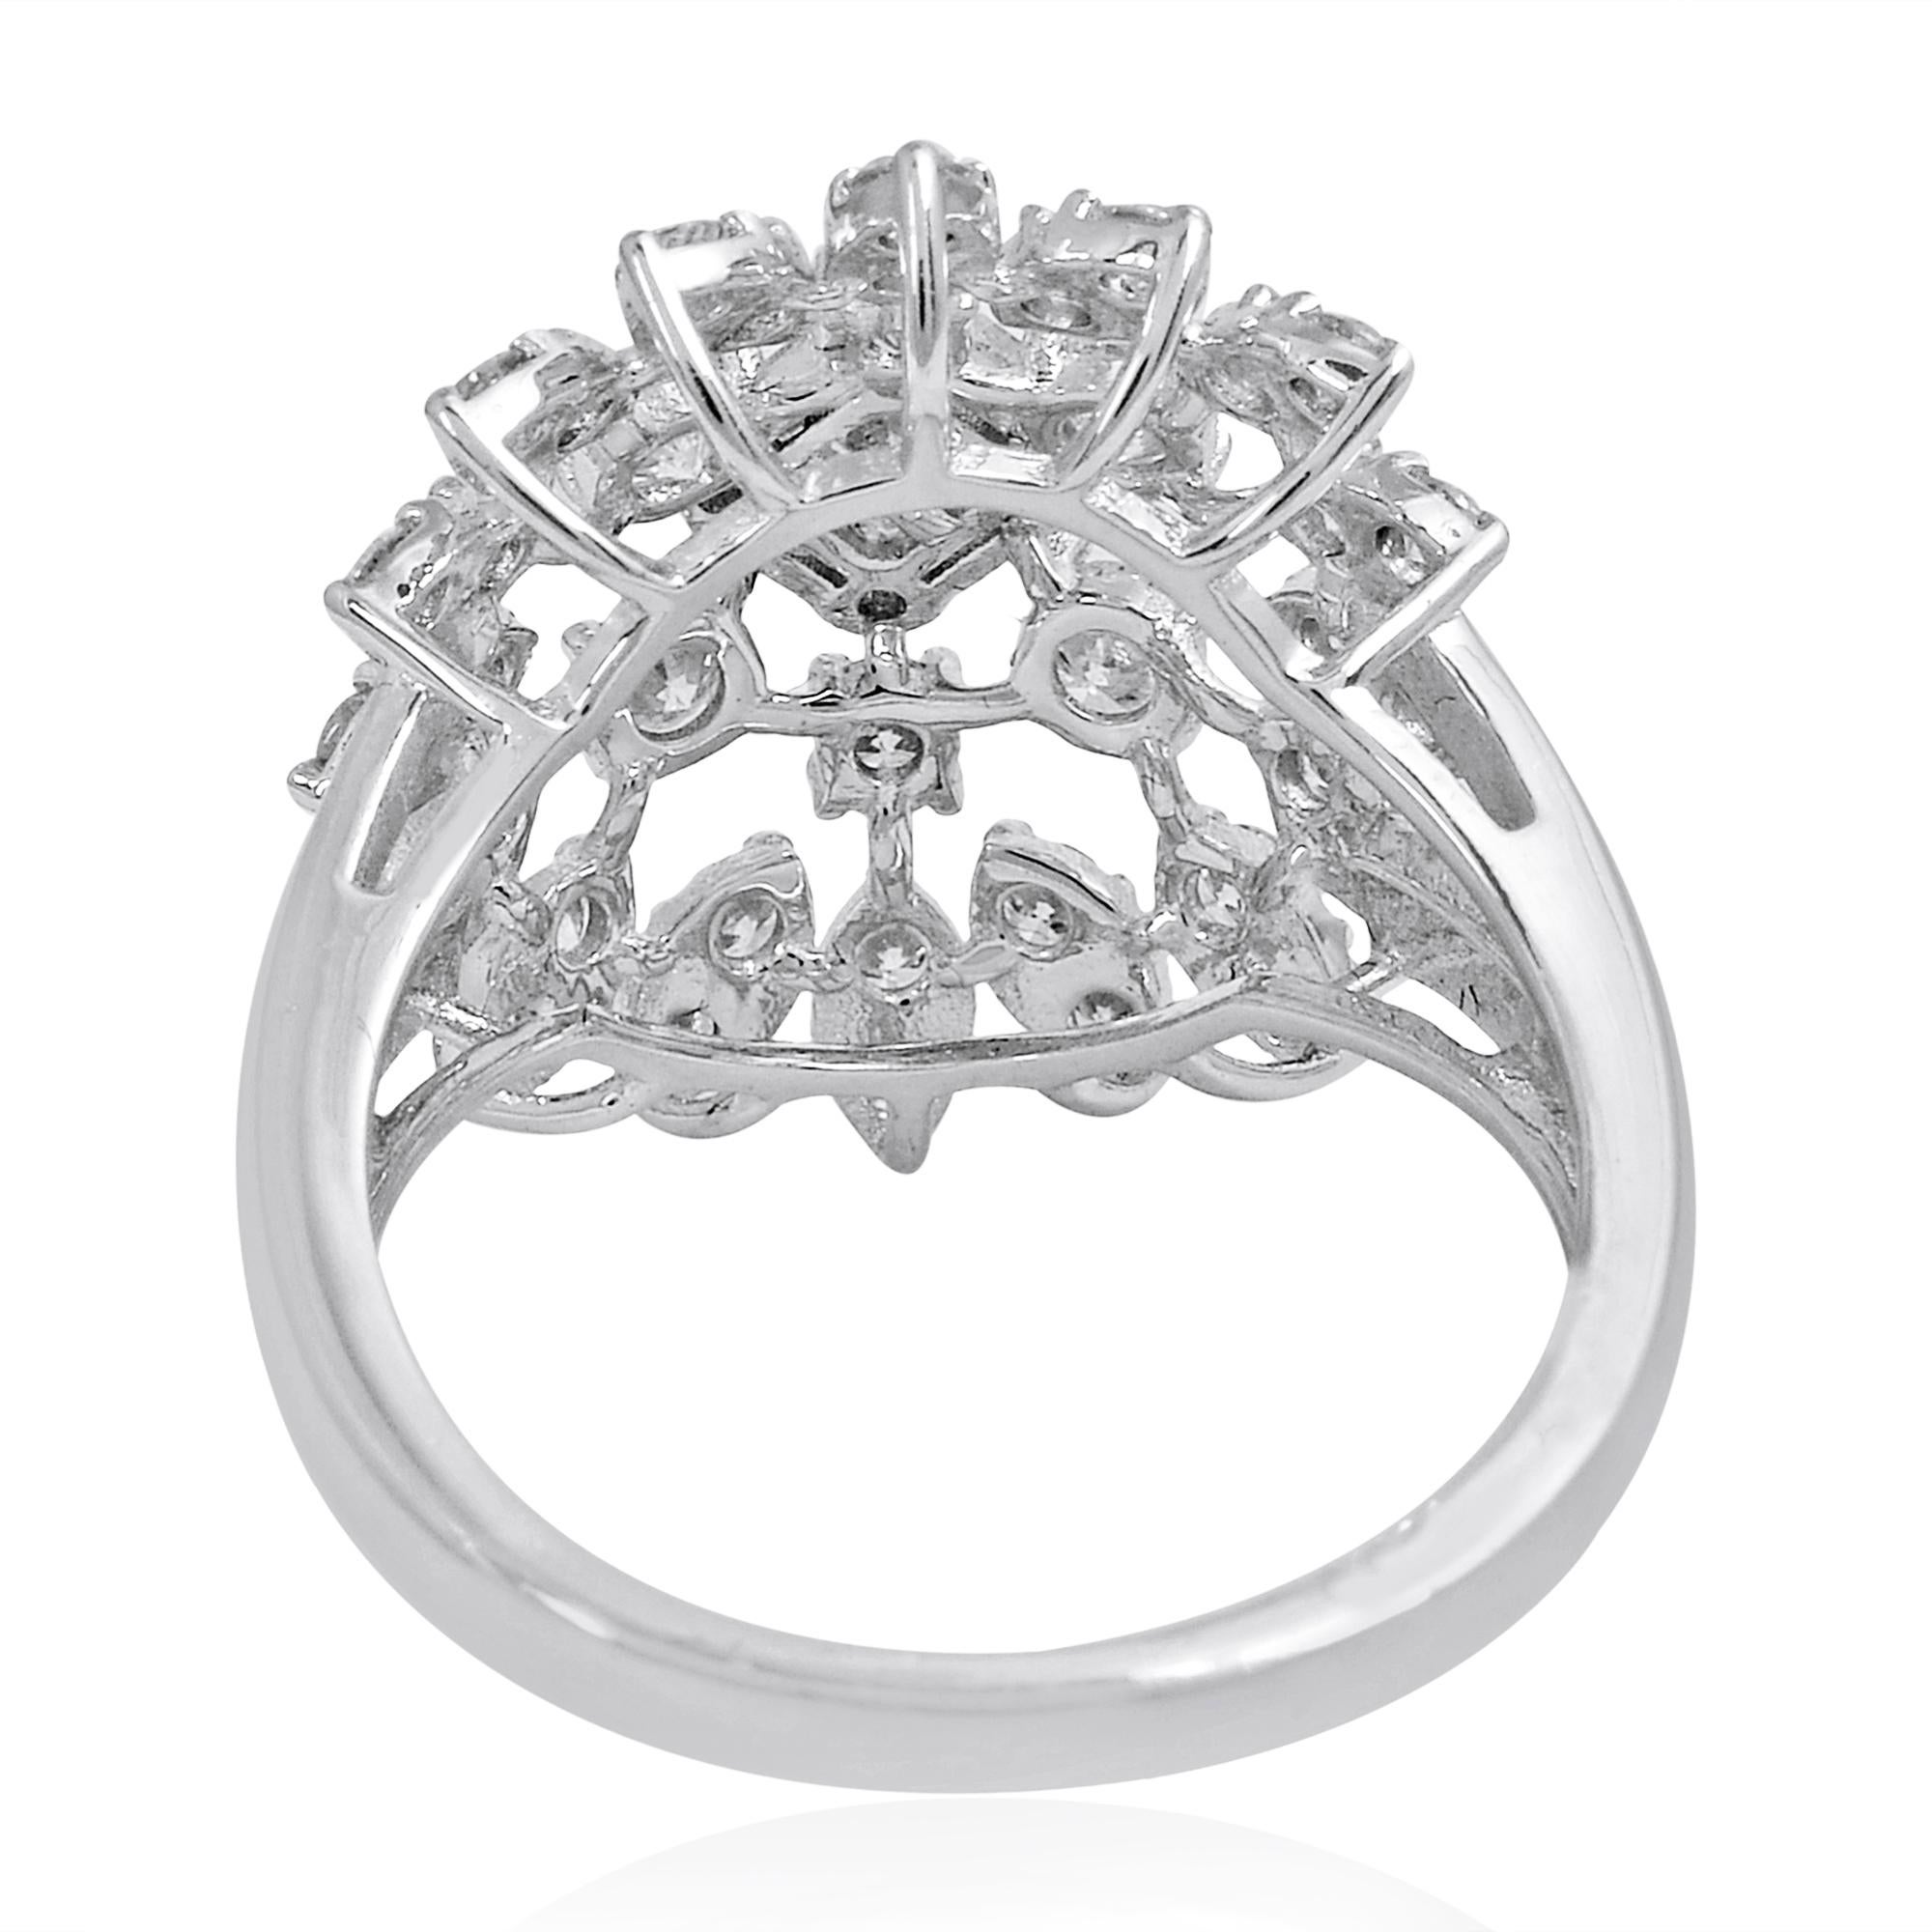 For Sale:  1.70 Carat SI Clarity HI Color Diamond Cocktail Ring 18 Karat White Gold Jewelry 2